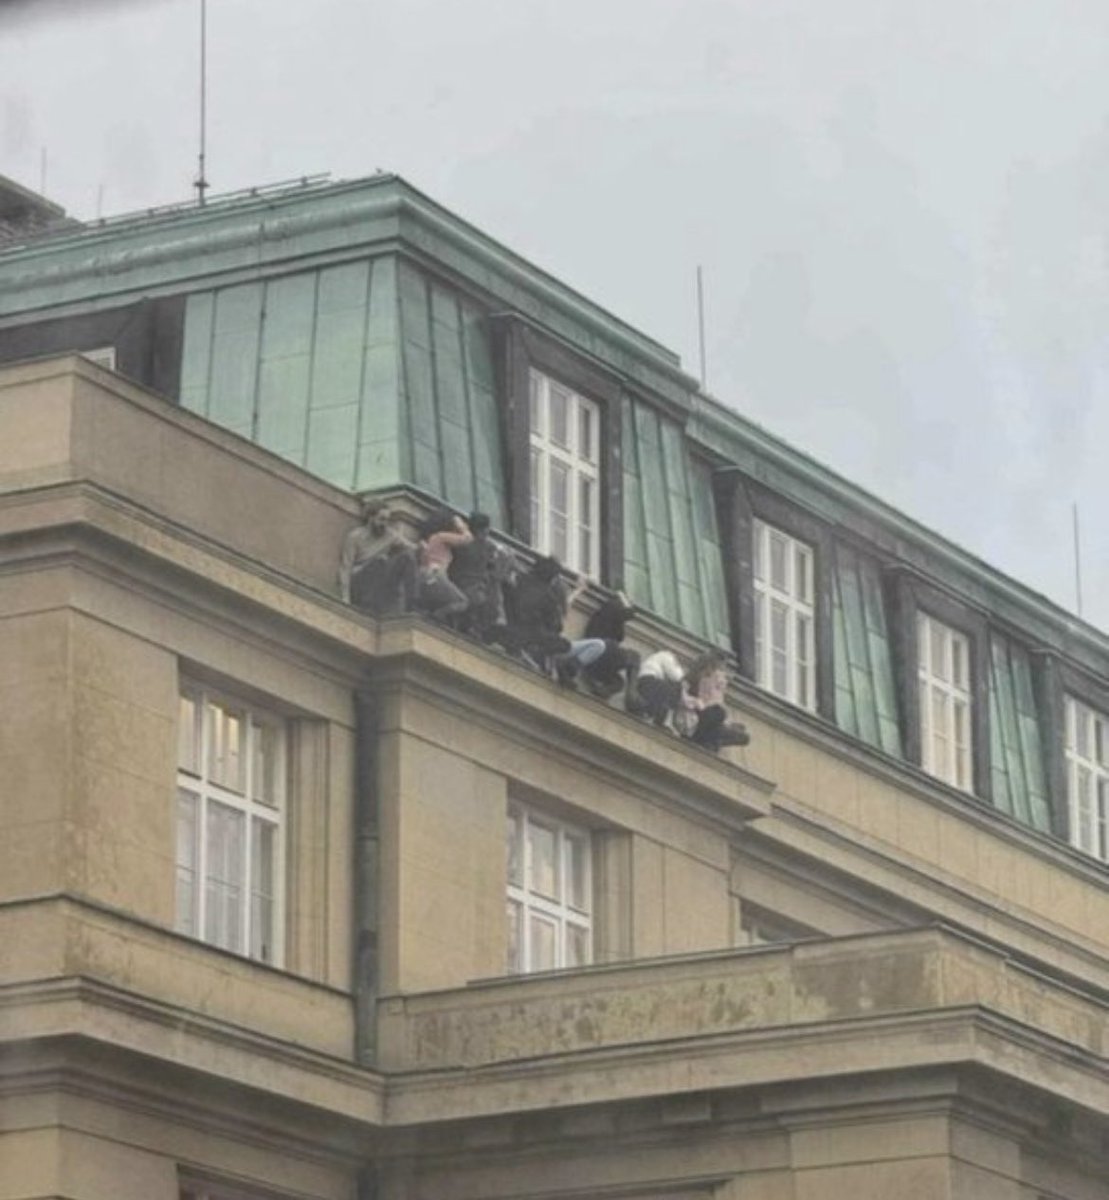 Students hiding from a killer during a shooting at Charles University in Prague, Czech Republic, earlier today.